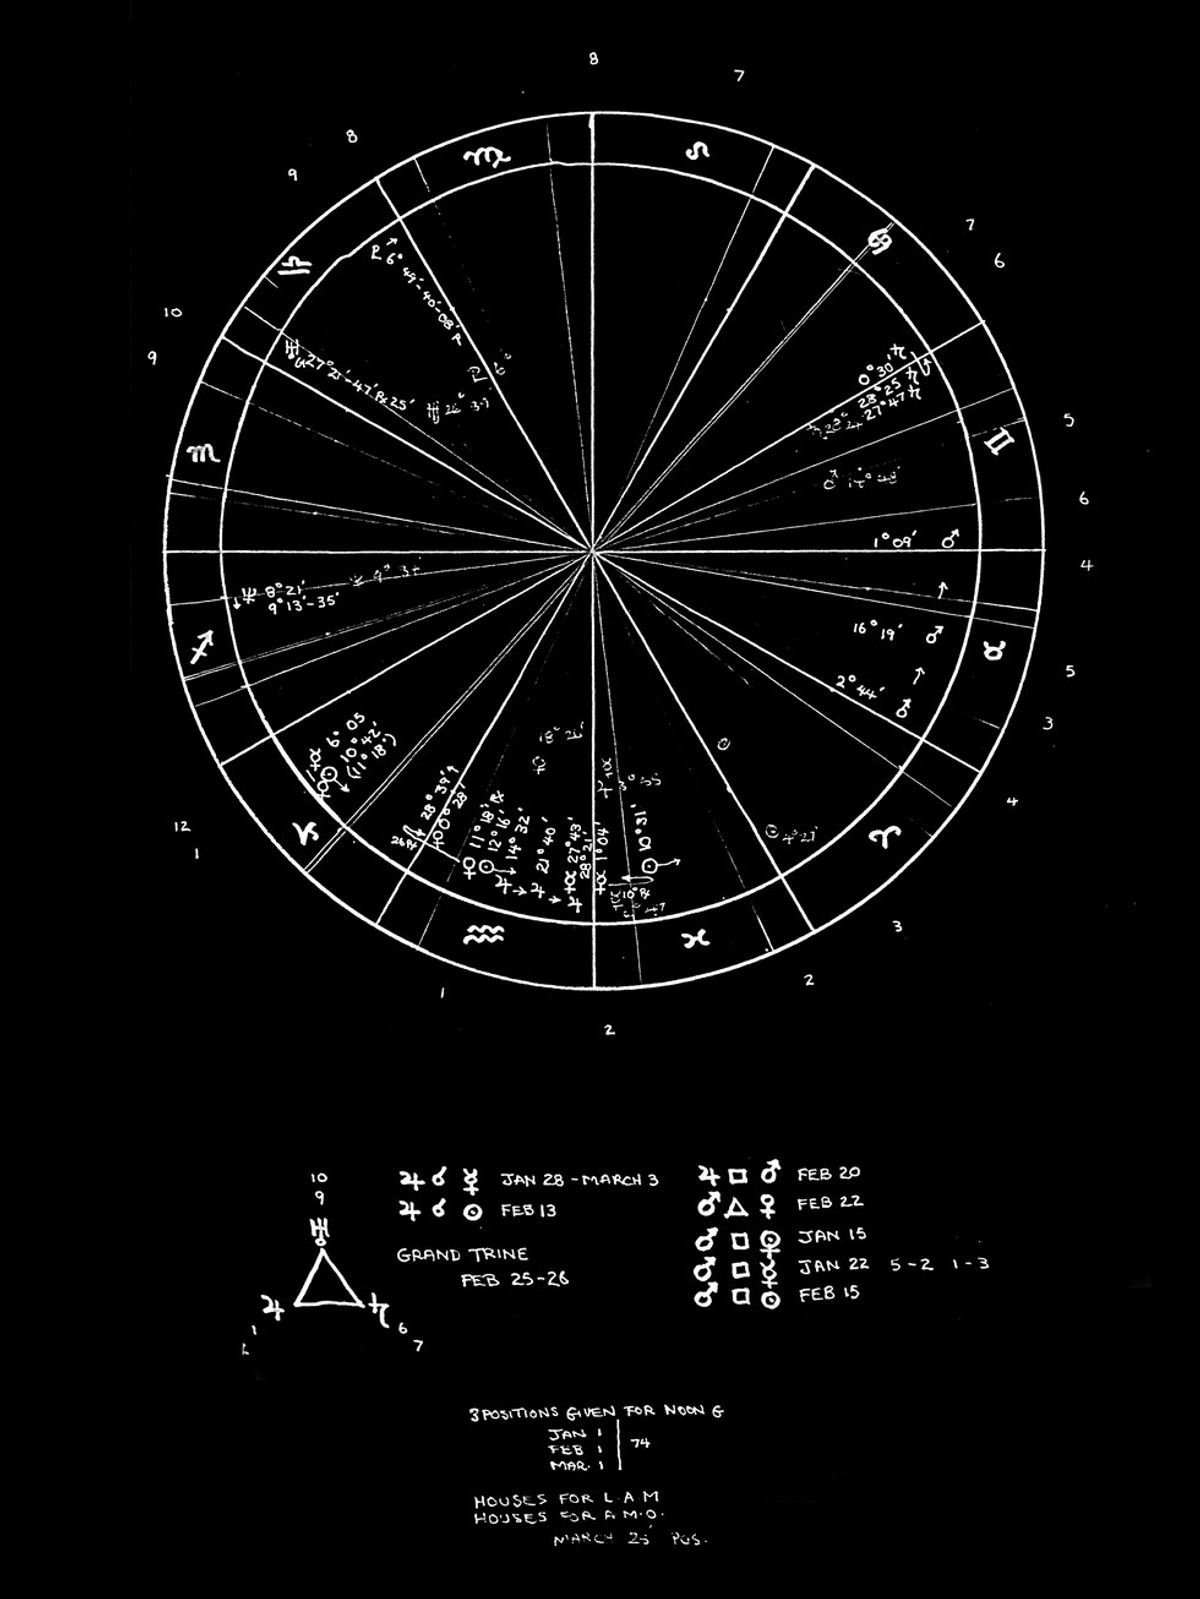 Astrology: Believer or Non-Believer?